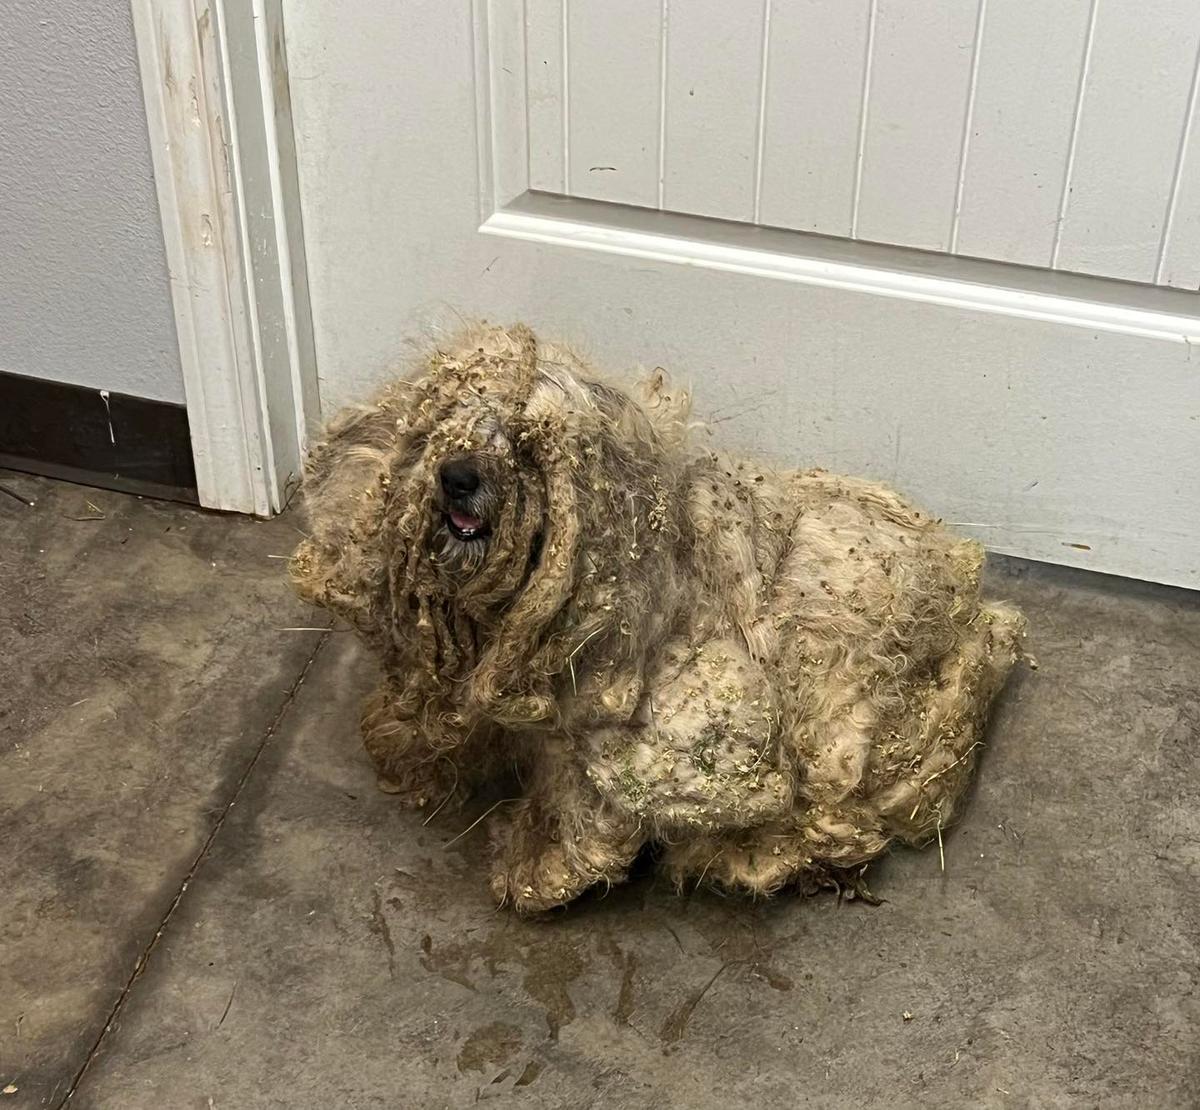 An extremely matted Matt when he was bought to South Plains SCPA. (Courtesy of Tori Houston and South Plains SPCA)